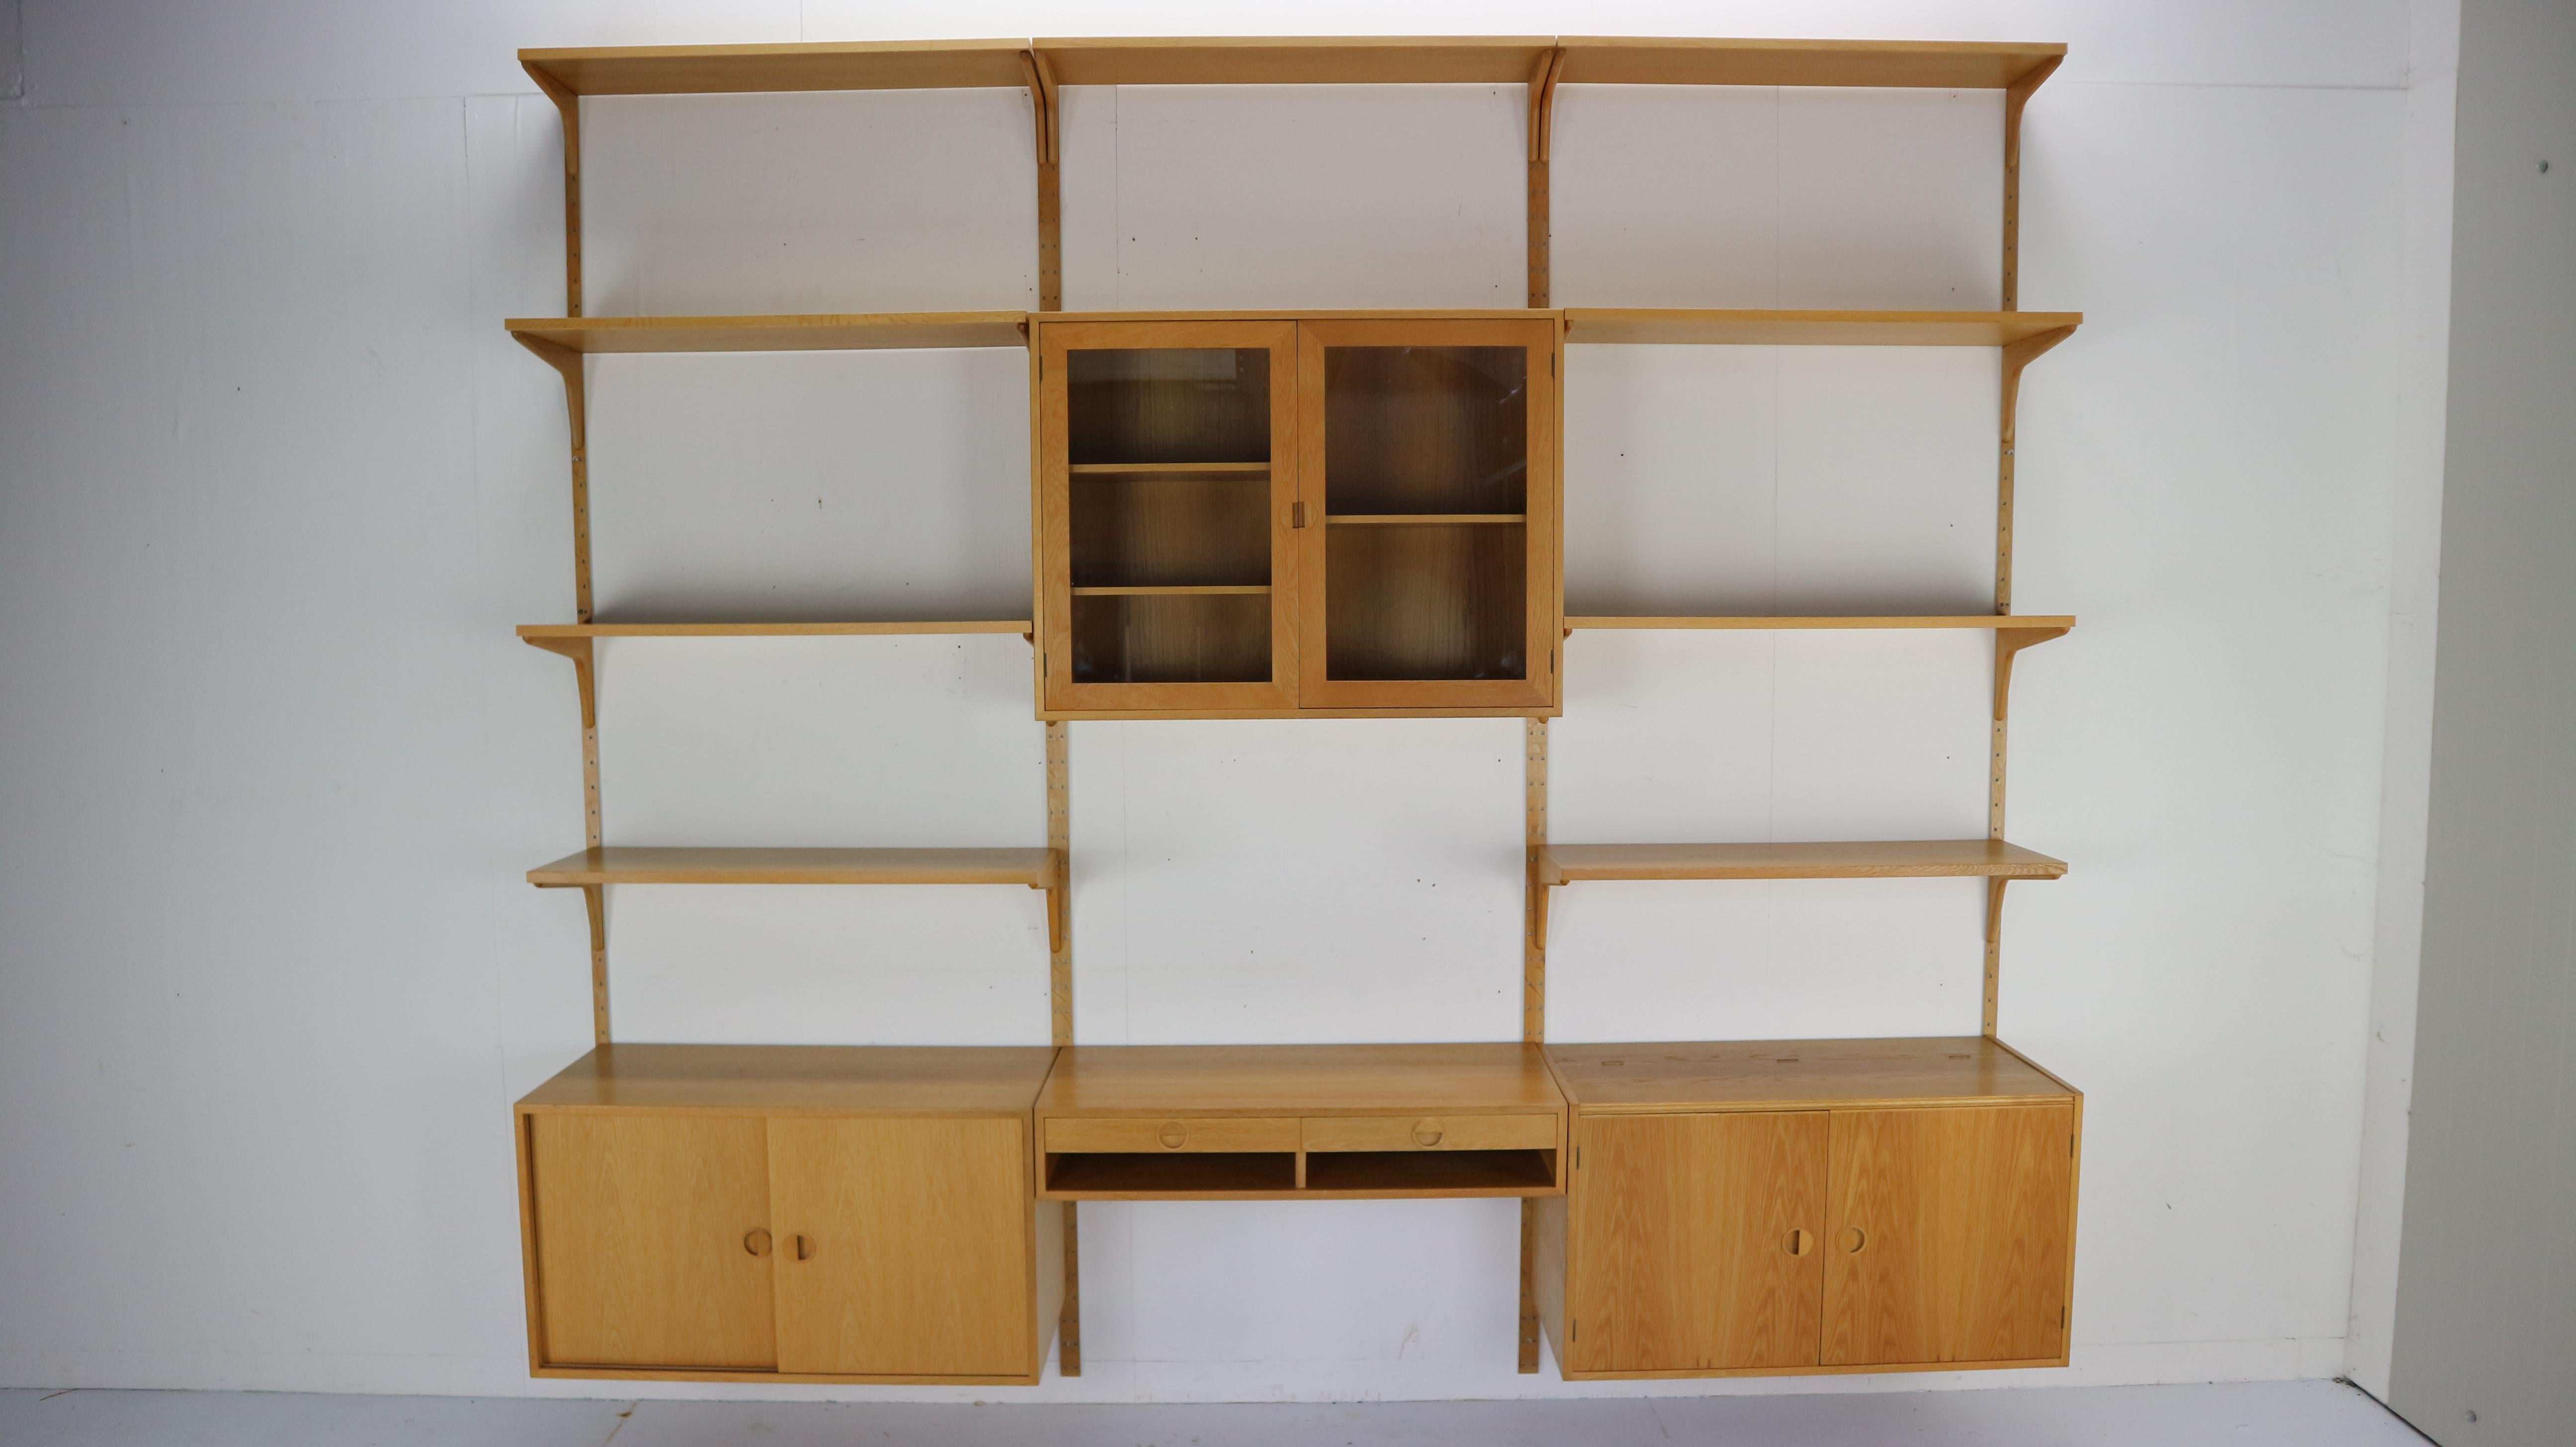 Danish modern modular wall unit design by Rud Thygesen & Johnny Soren and manufactured Hansen & Guldborg Møbler in 1960s, Denmark.
Made from oakwood.
This unit is completely modular and can be configured however suits your needs.
Shelve